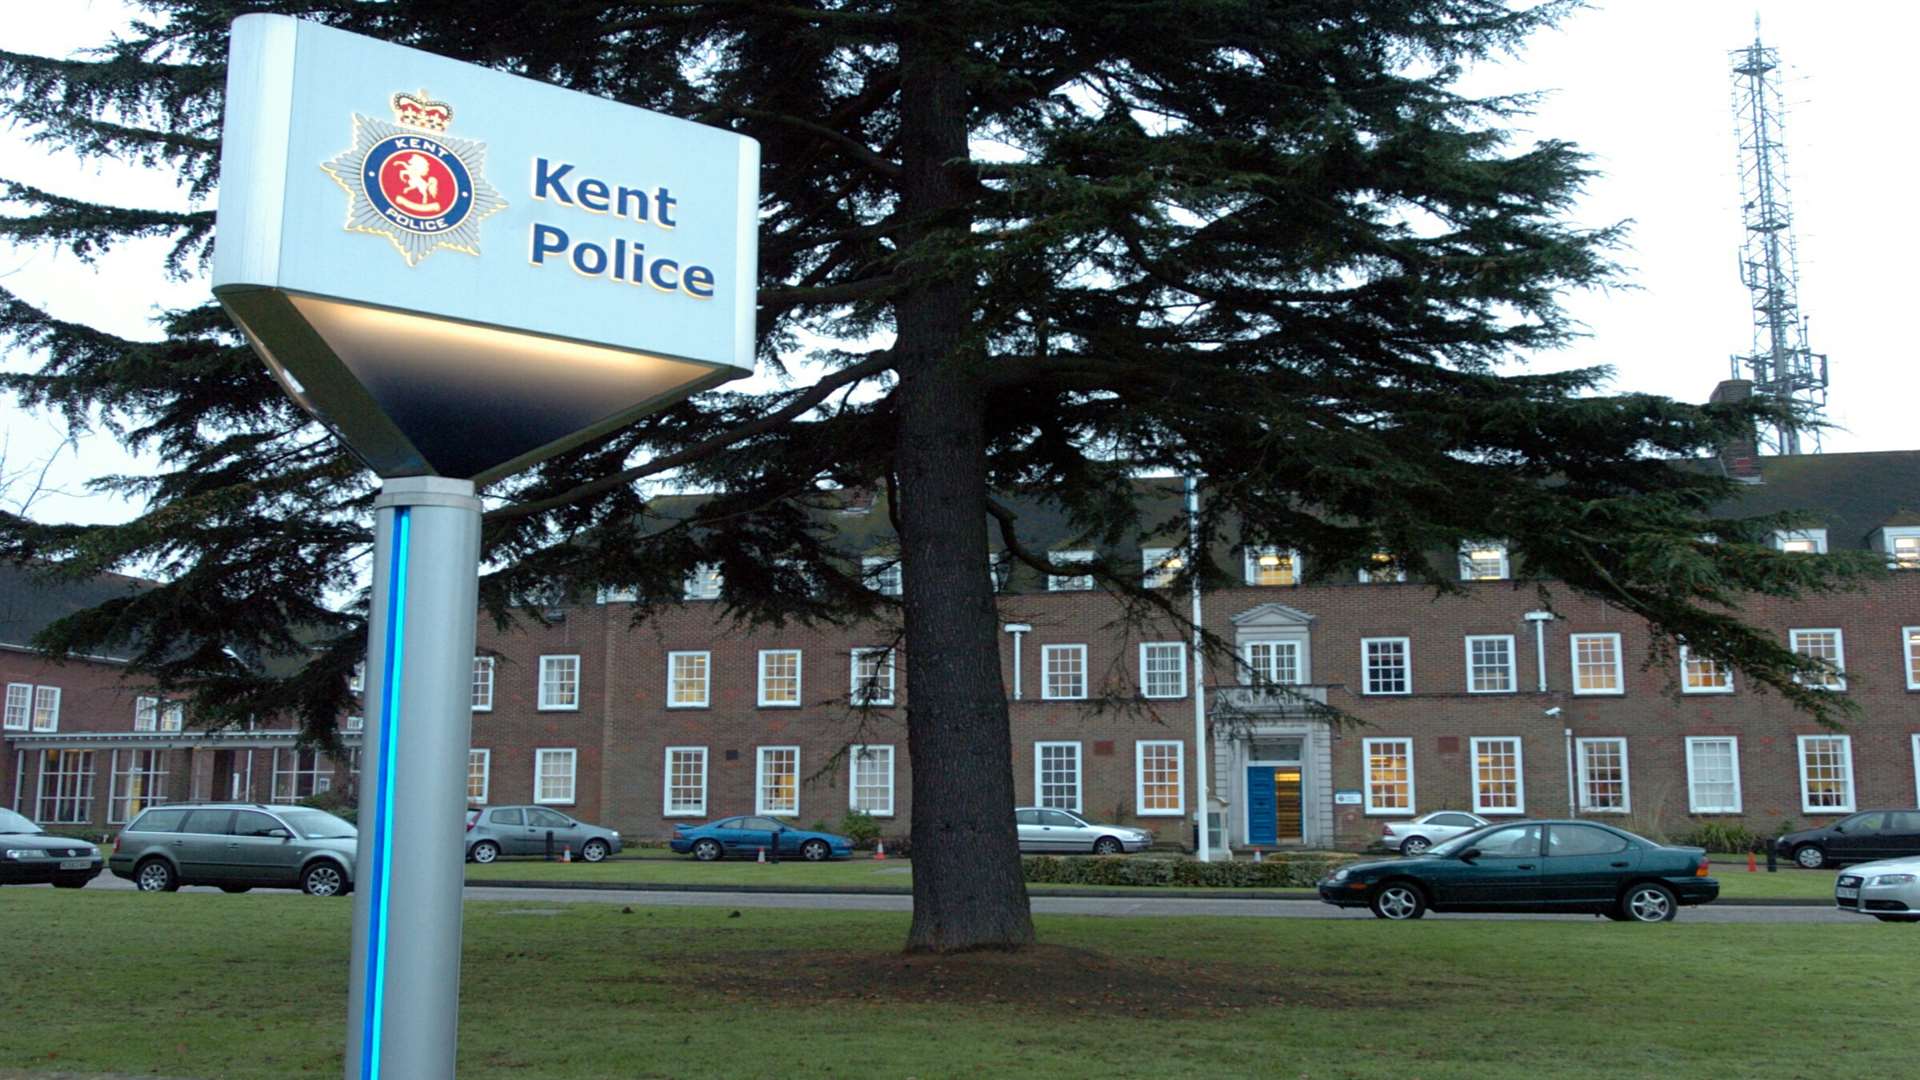 Kent police wants the developer to contribute cash to the force